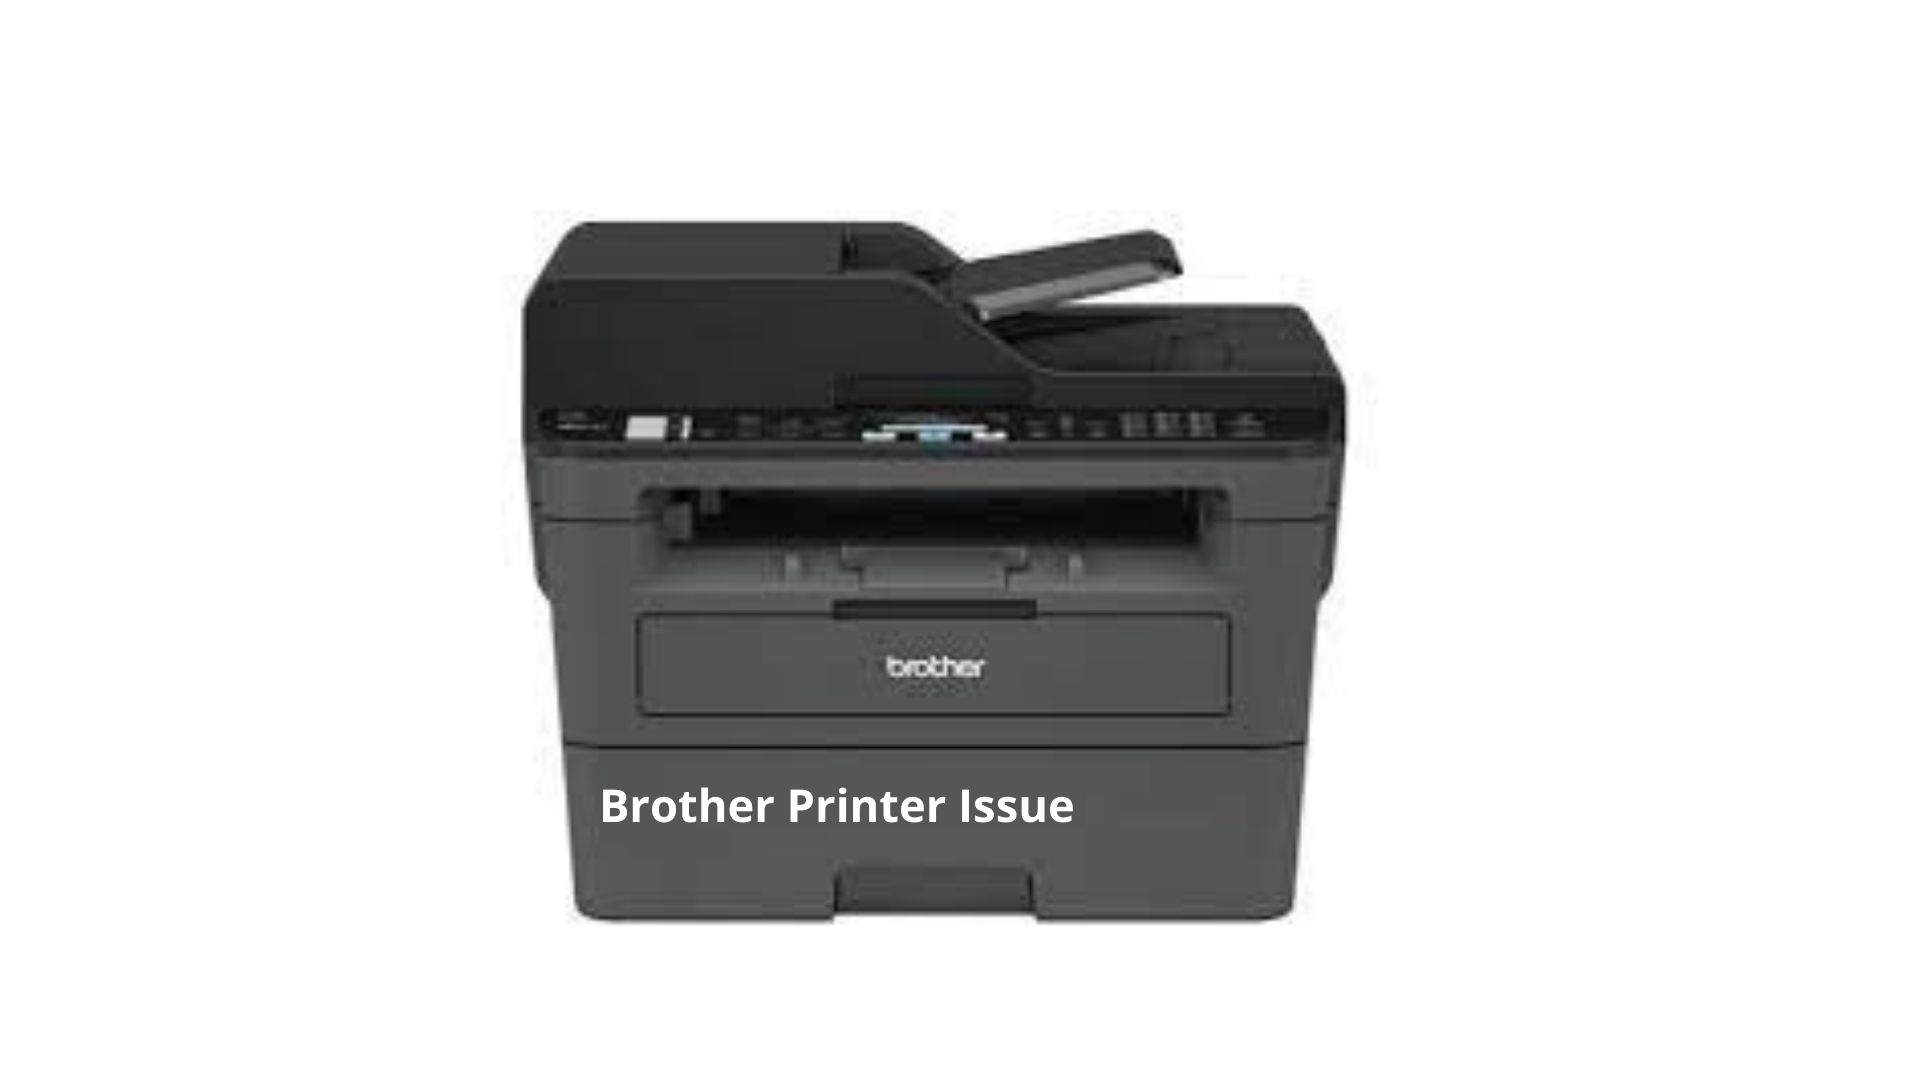 Brother Printer Issue